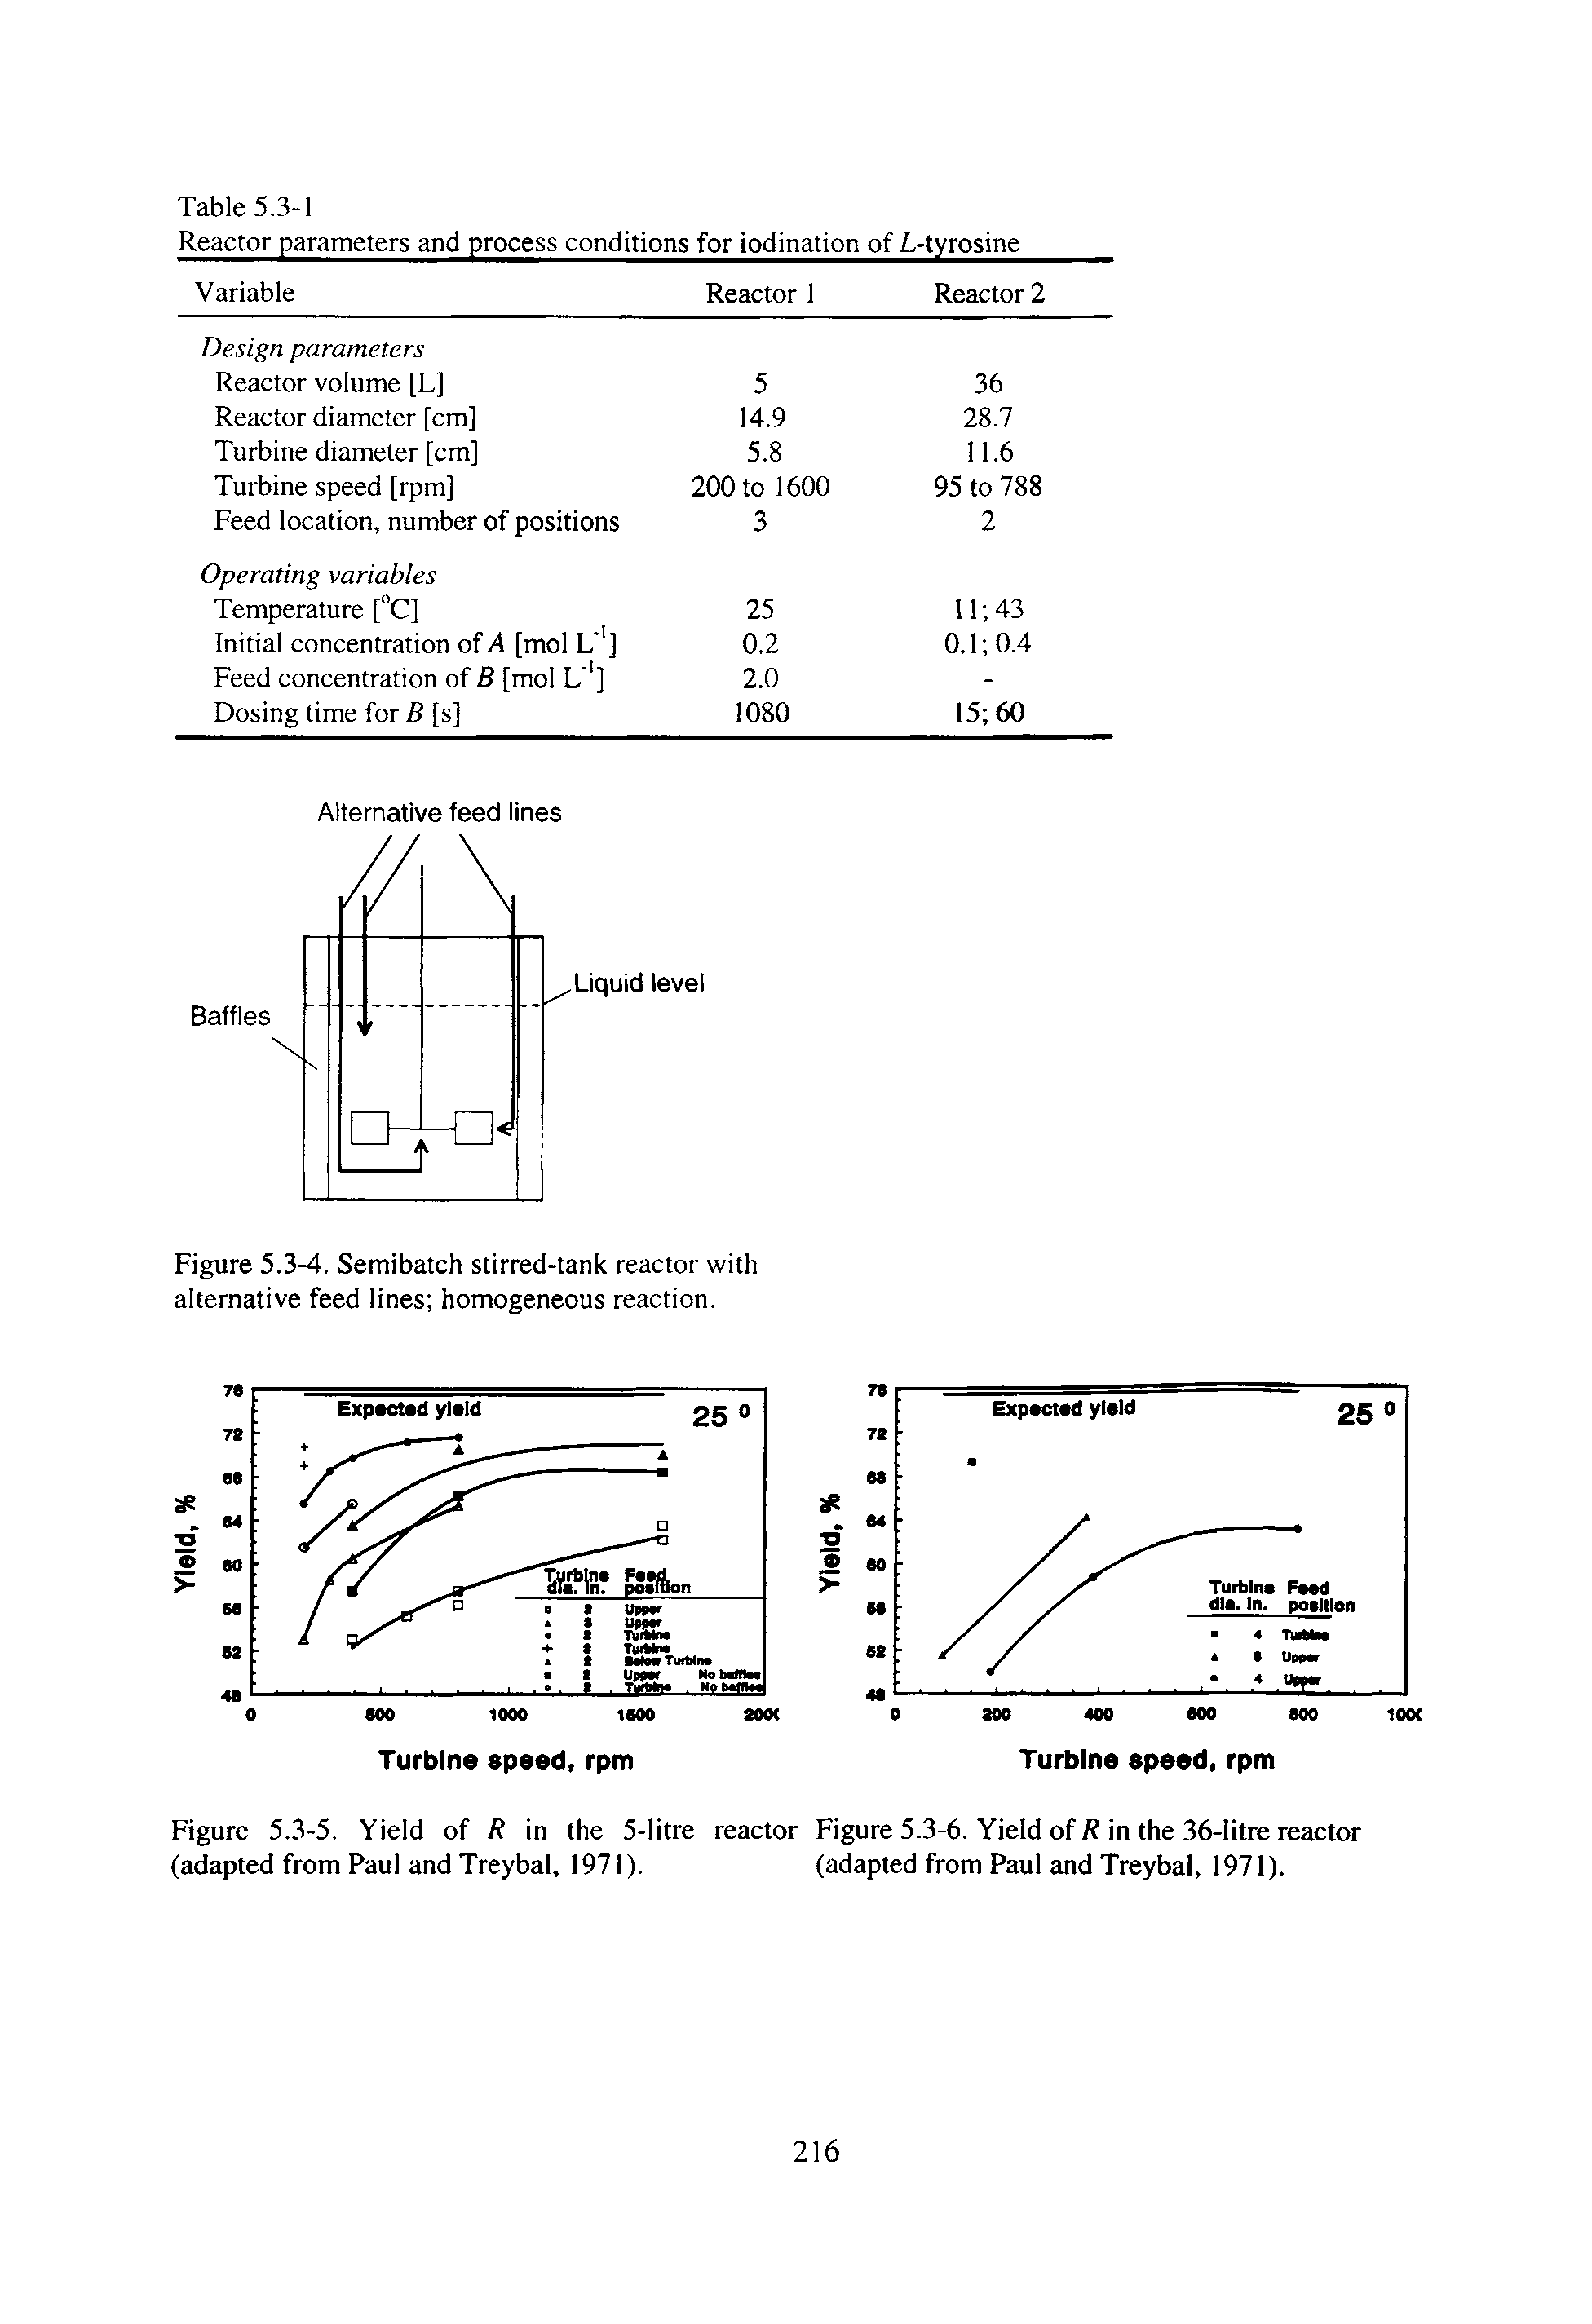 Figure 5.3-4. Semibatch stirred-tank reactor with alternative feed lines homogeneous reaction.